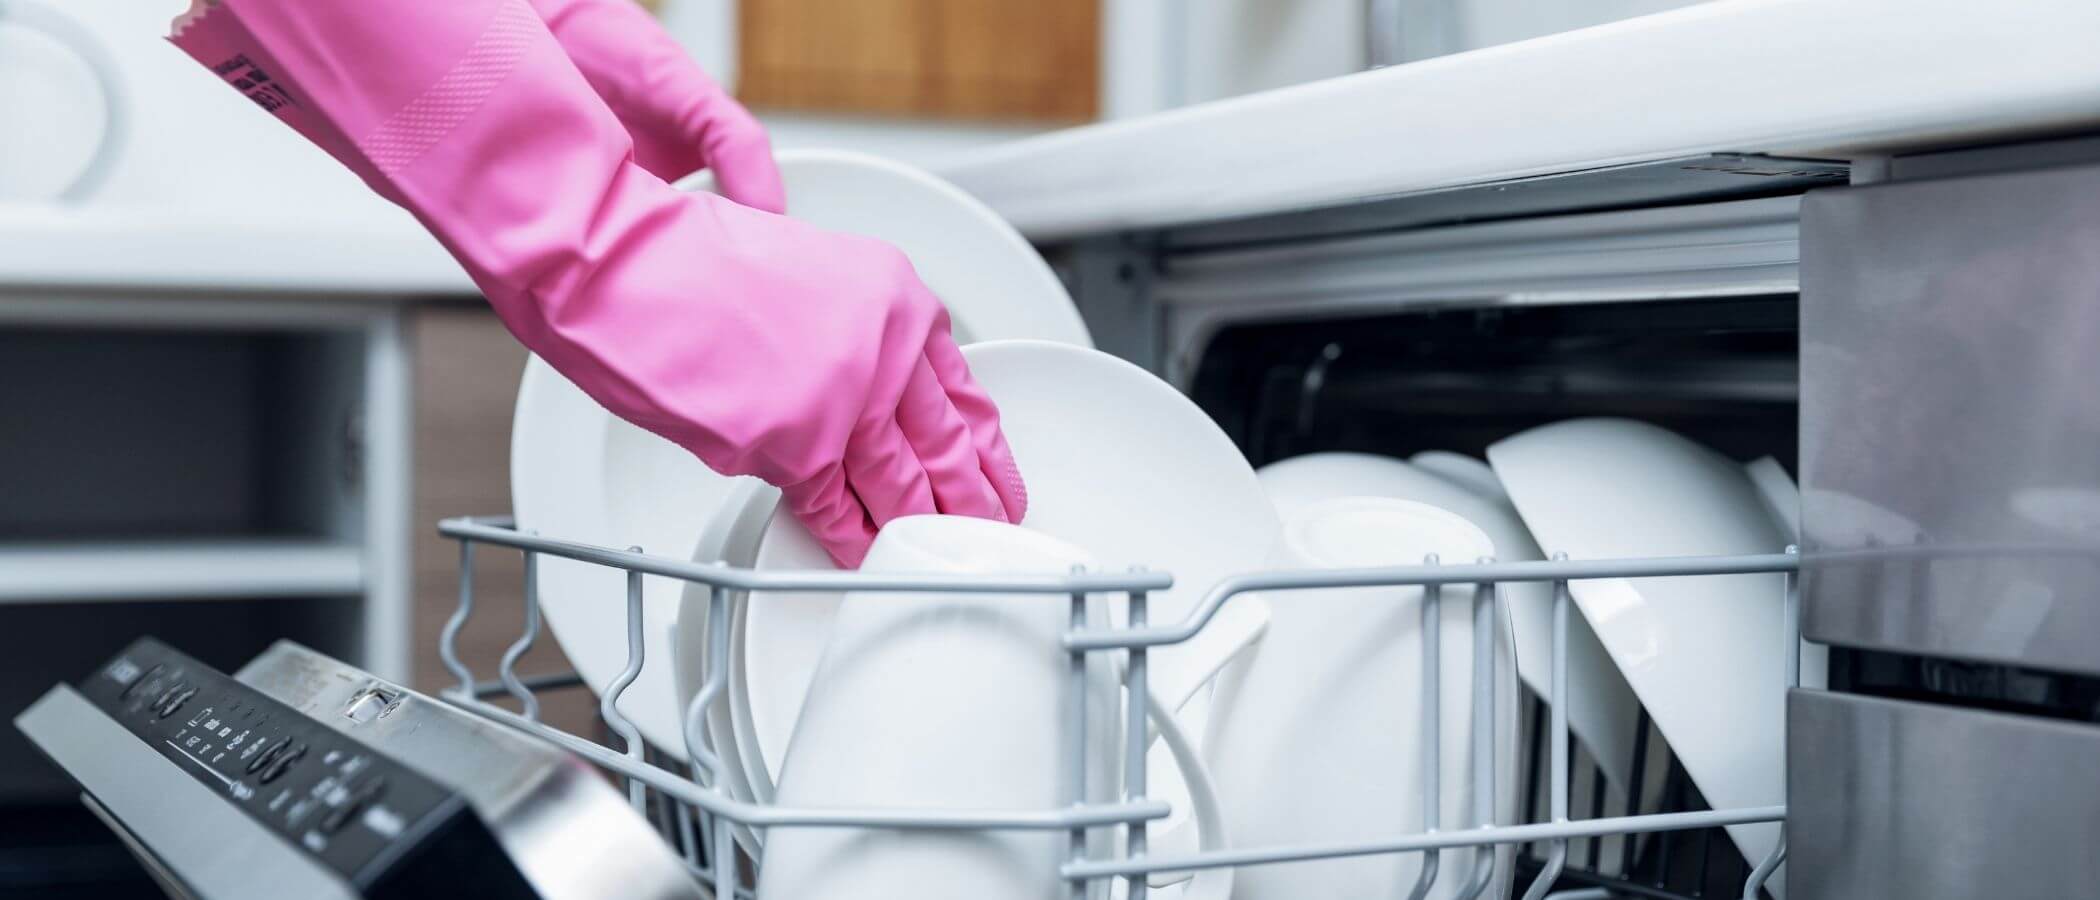 How to Make Your Dishwasher Perform Better - 6 Easy Tips